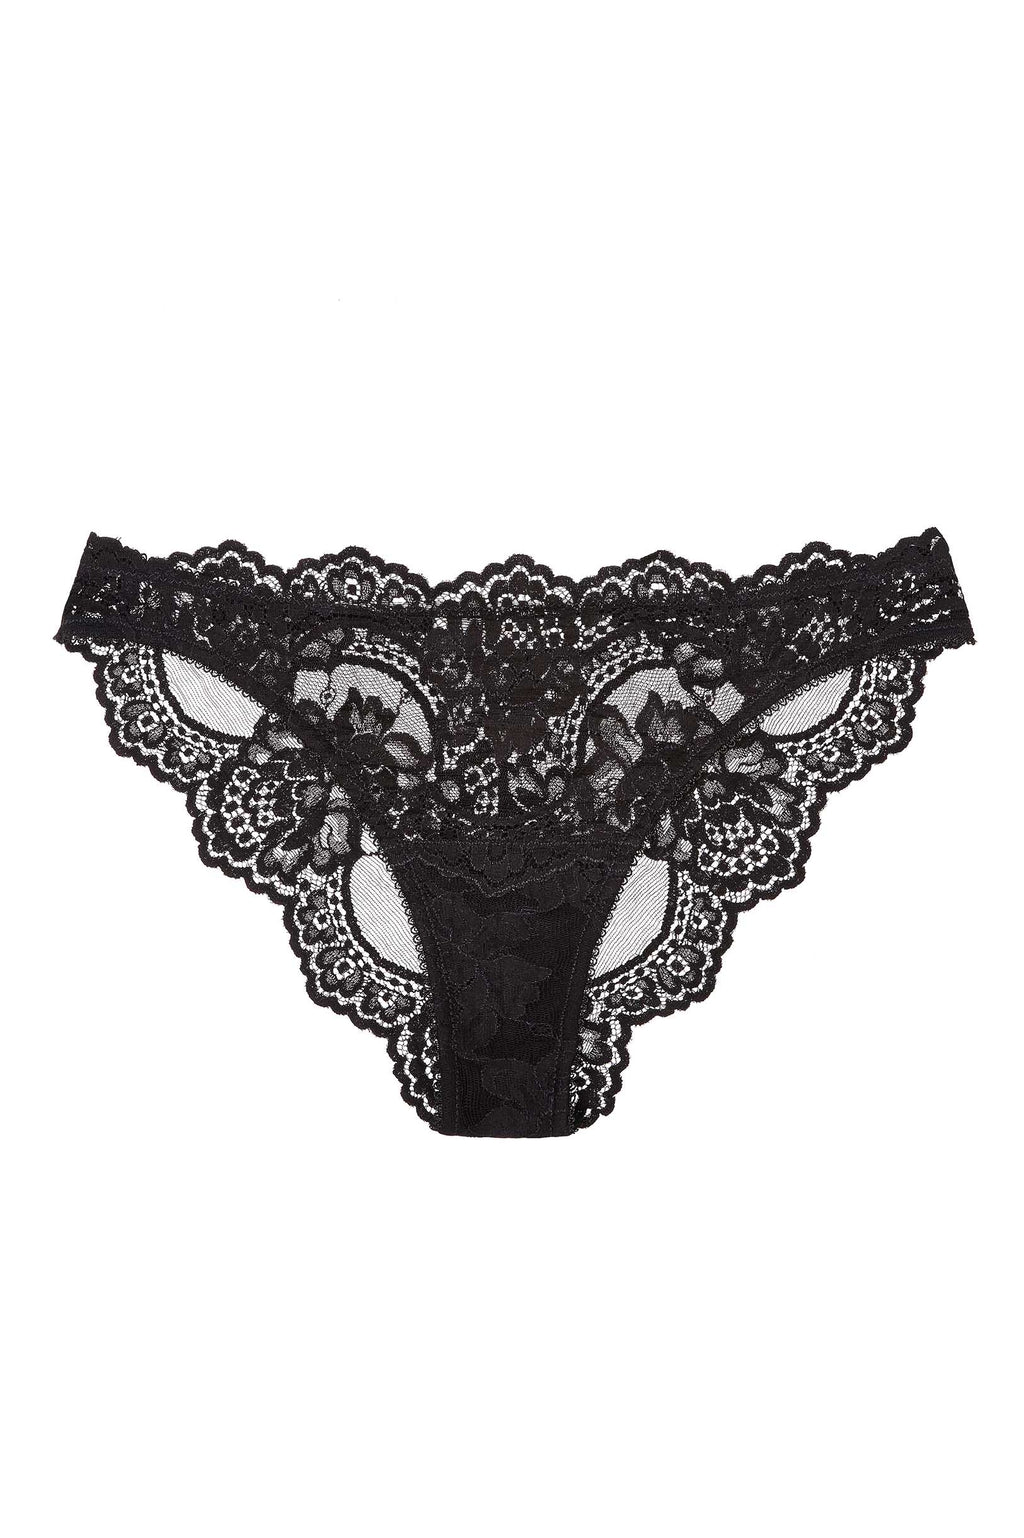 Rosa Scalloped French lace Panties briefs in Black –